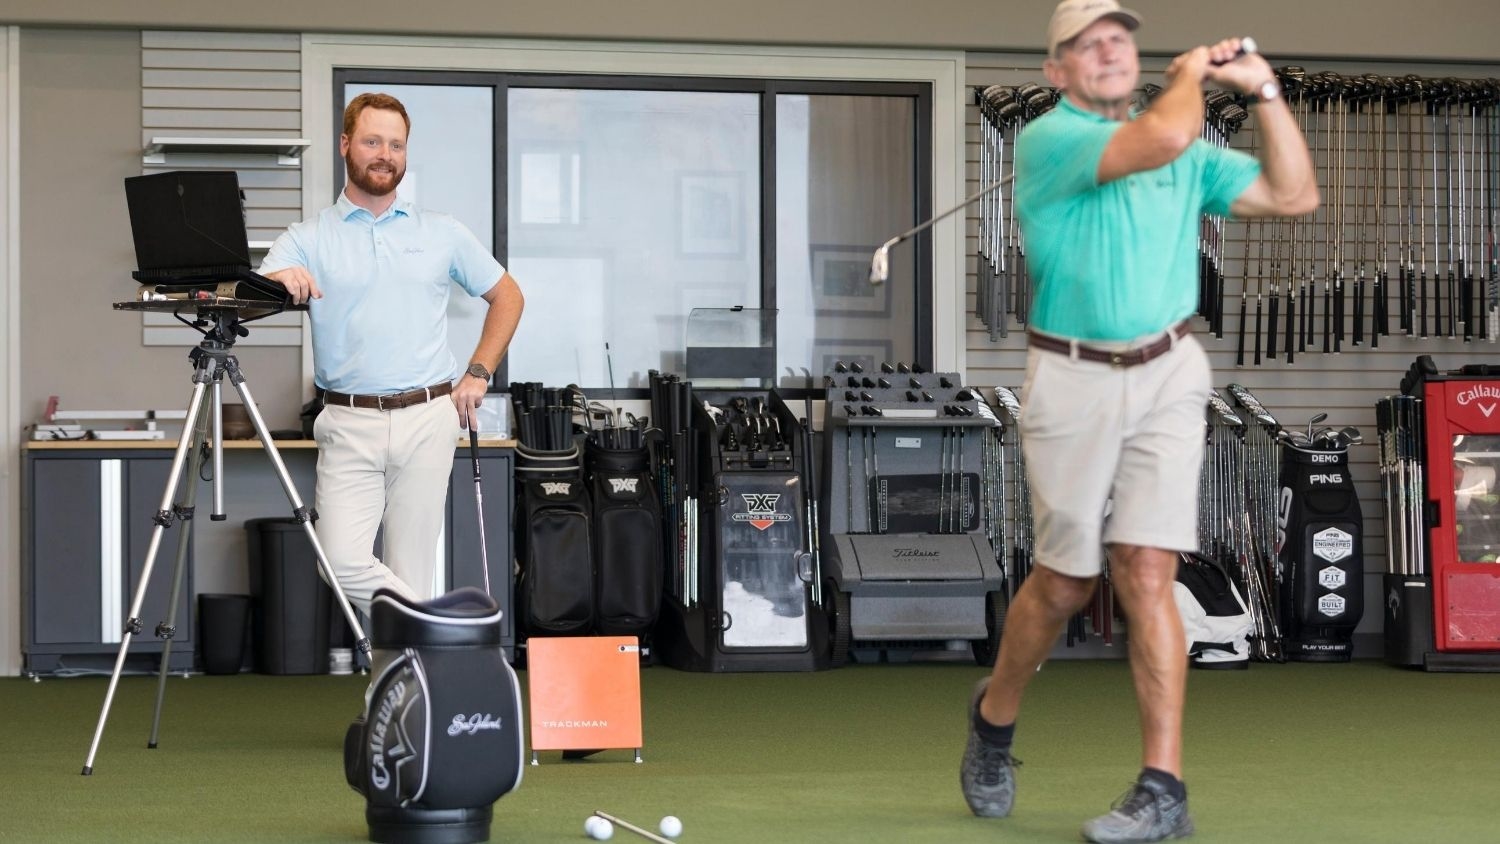 Golf Lesson and Practice - Tee Time: A Conversation with a Golf Club Fitter - Parks Recreation and Tourism Management NC State